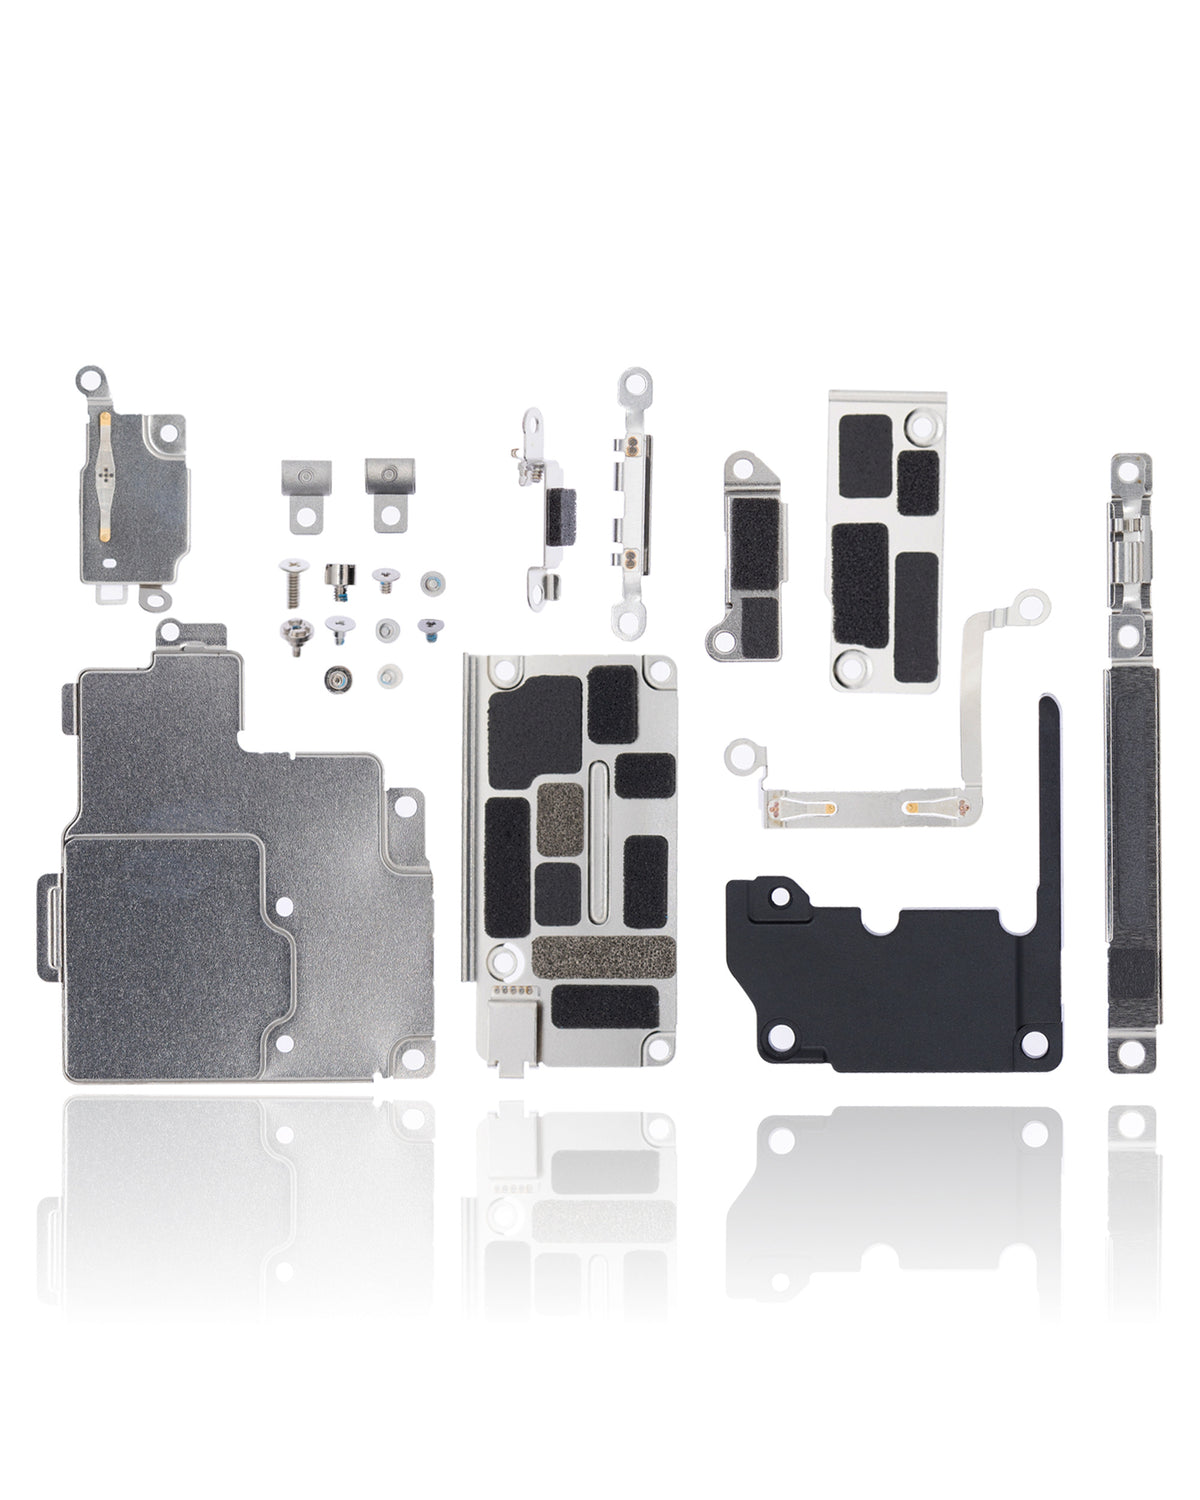 FULL SET SMALL METAL BRACKET FOR IPHONE 12